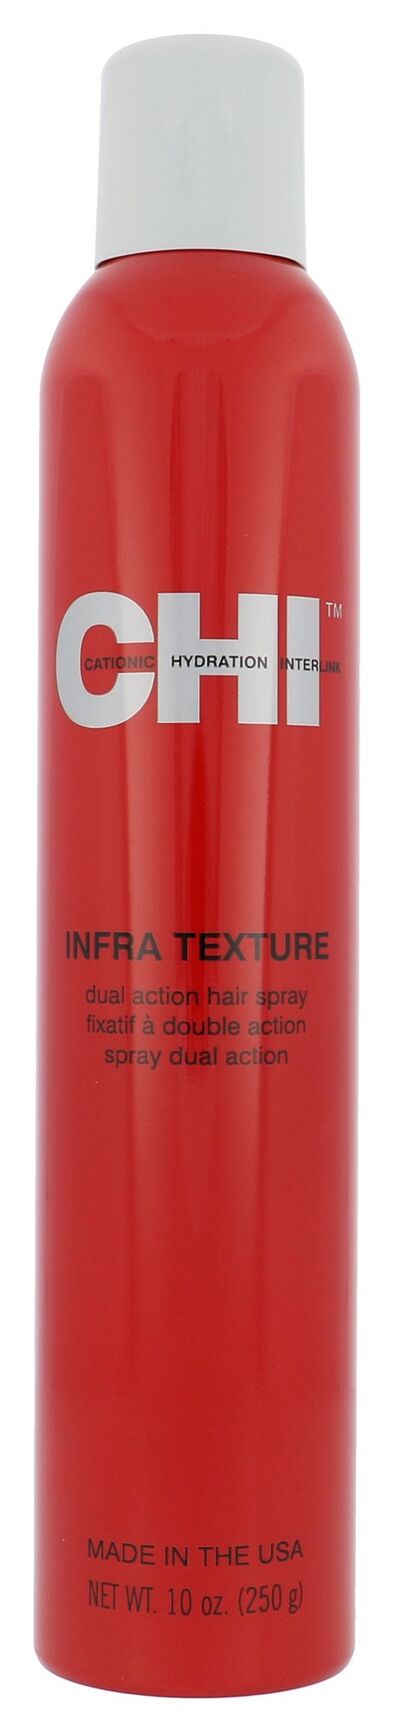 Farouk Systems CHI Thermal Styling Cosmetic 284ml 